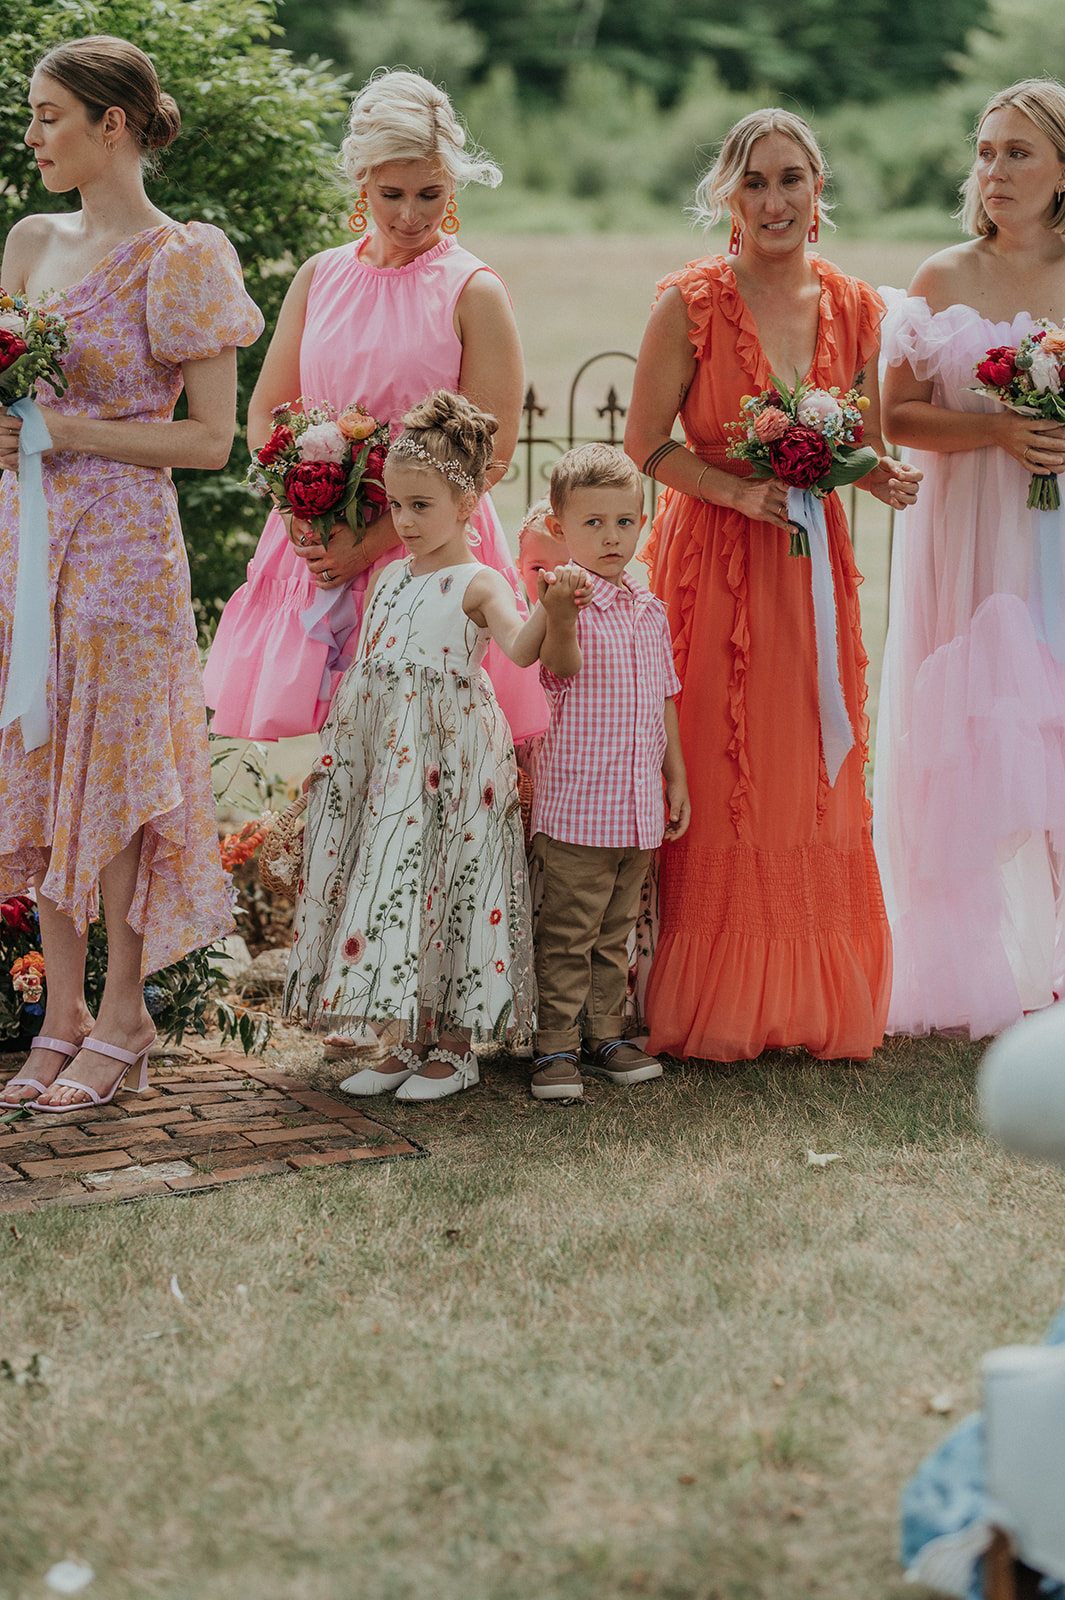 Candid photo of flower girl and ring bearer during ceremony